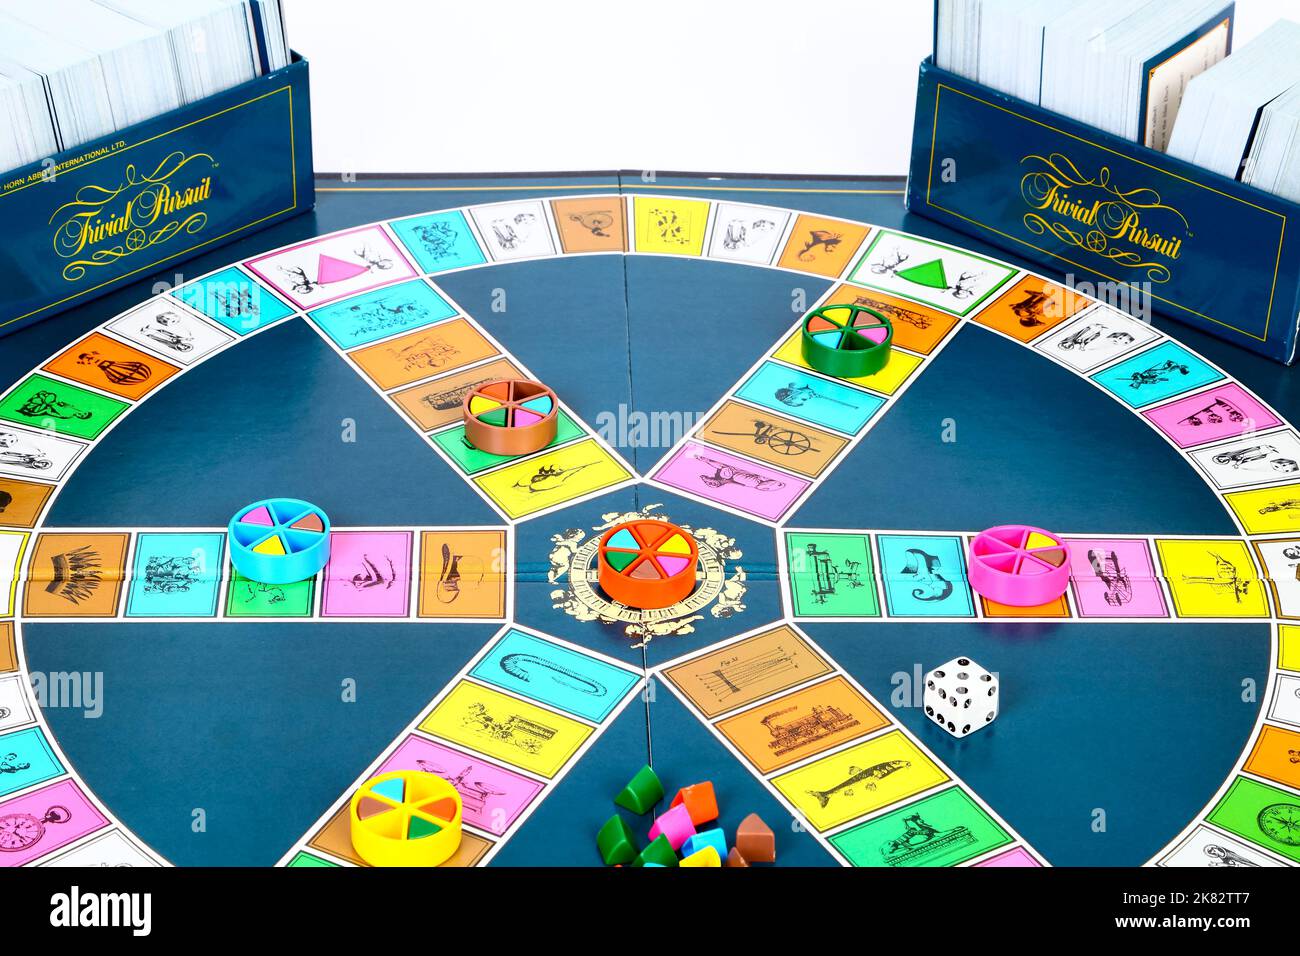 Trivial Pursuit the Genus edition general knowledge board game circa 1980s Stock Photo